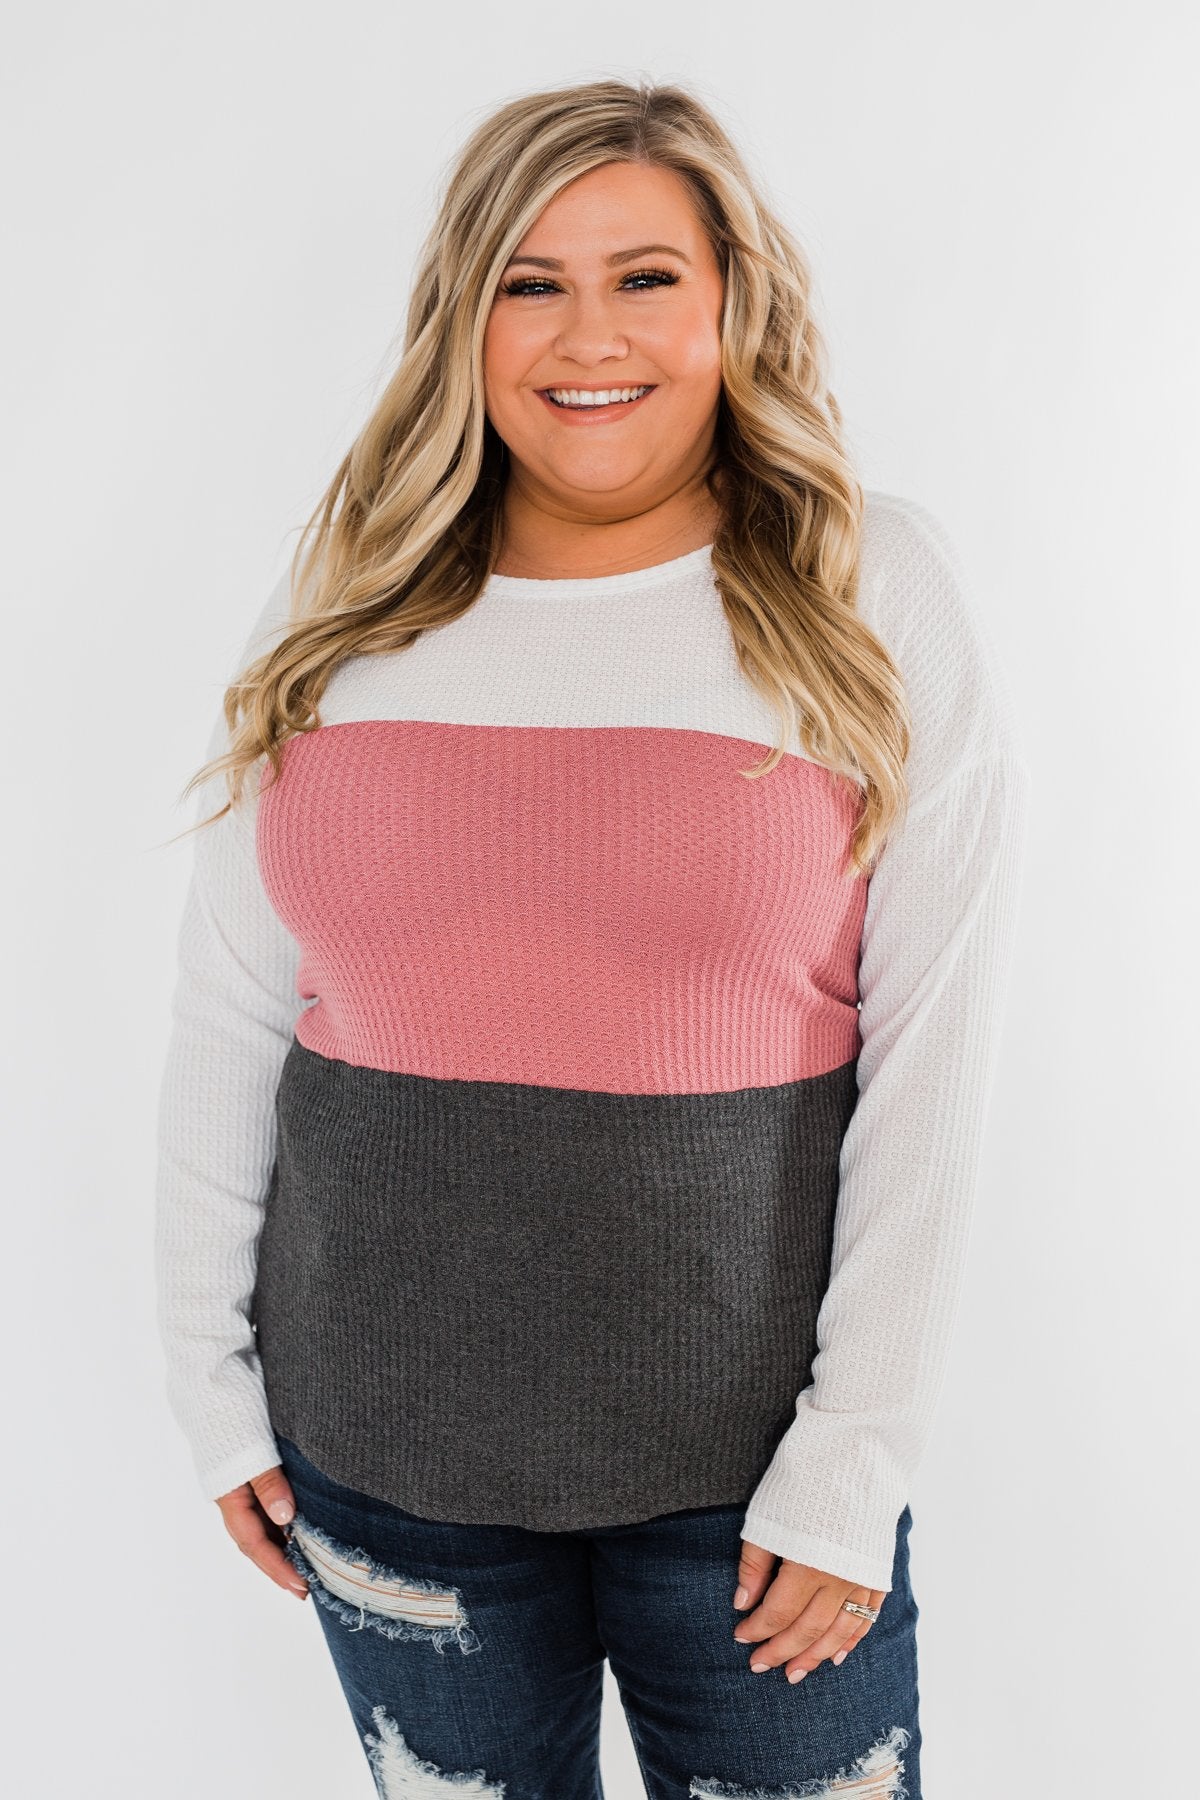 Away We Go Color Block Waffle Knit Top- Pink & Charcoal